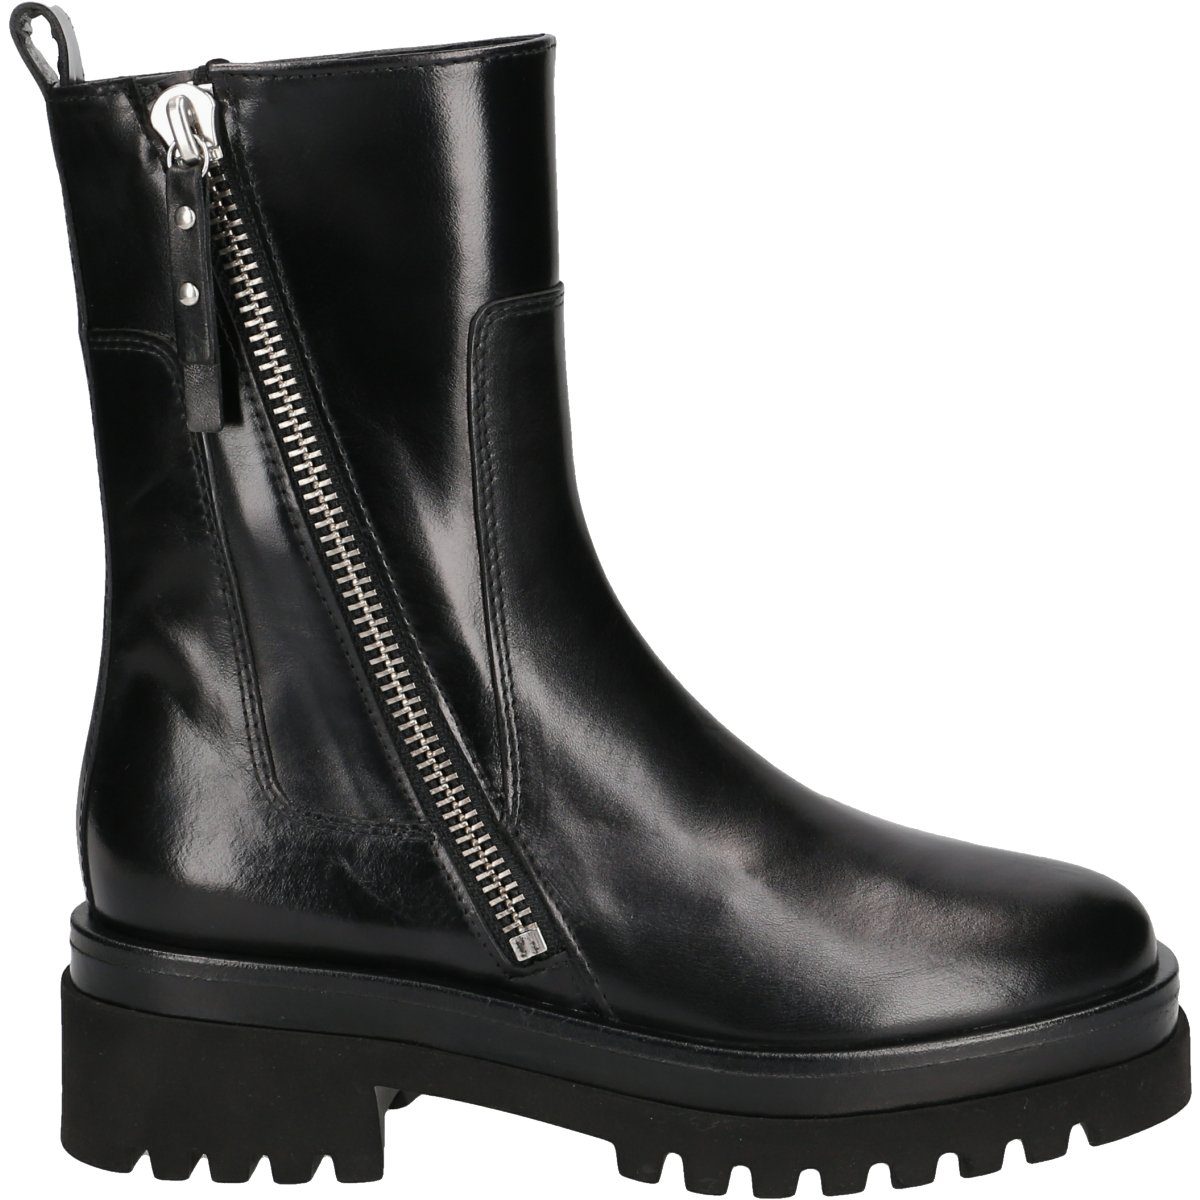 Homers Stiefel 20776